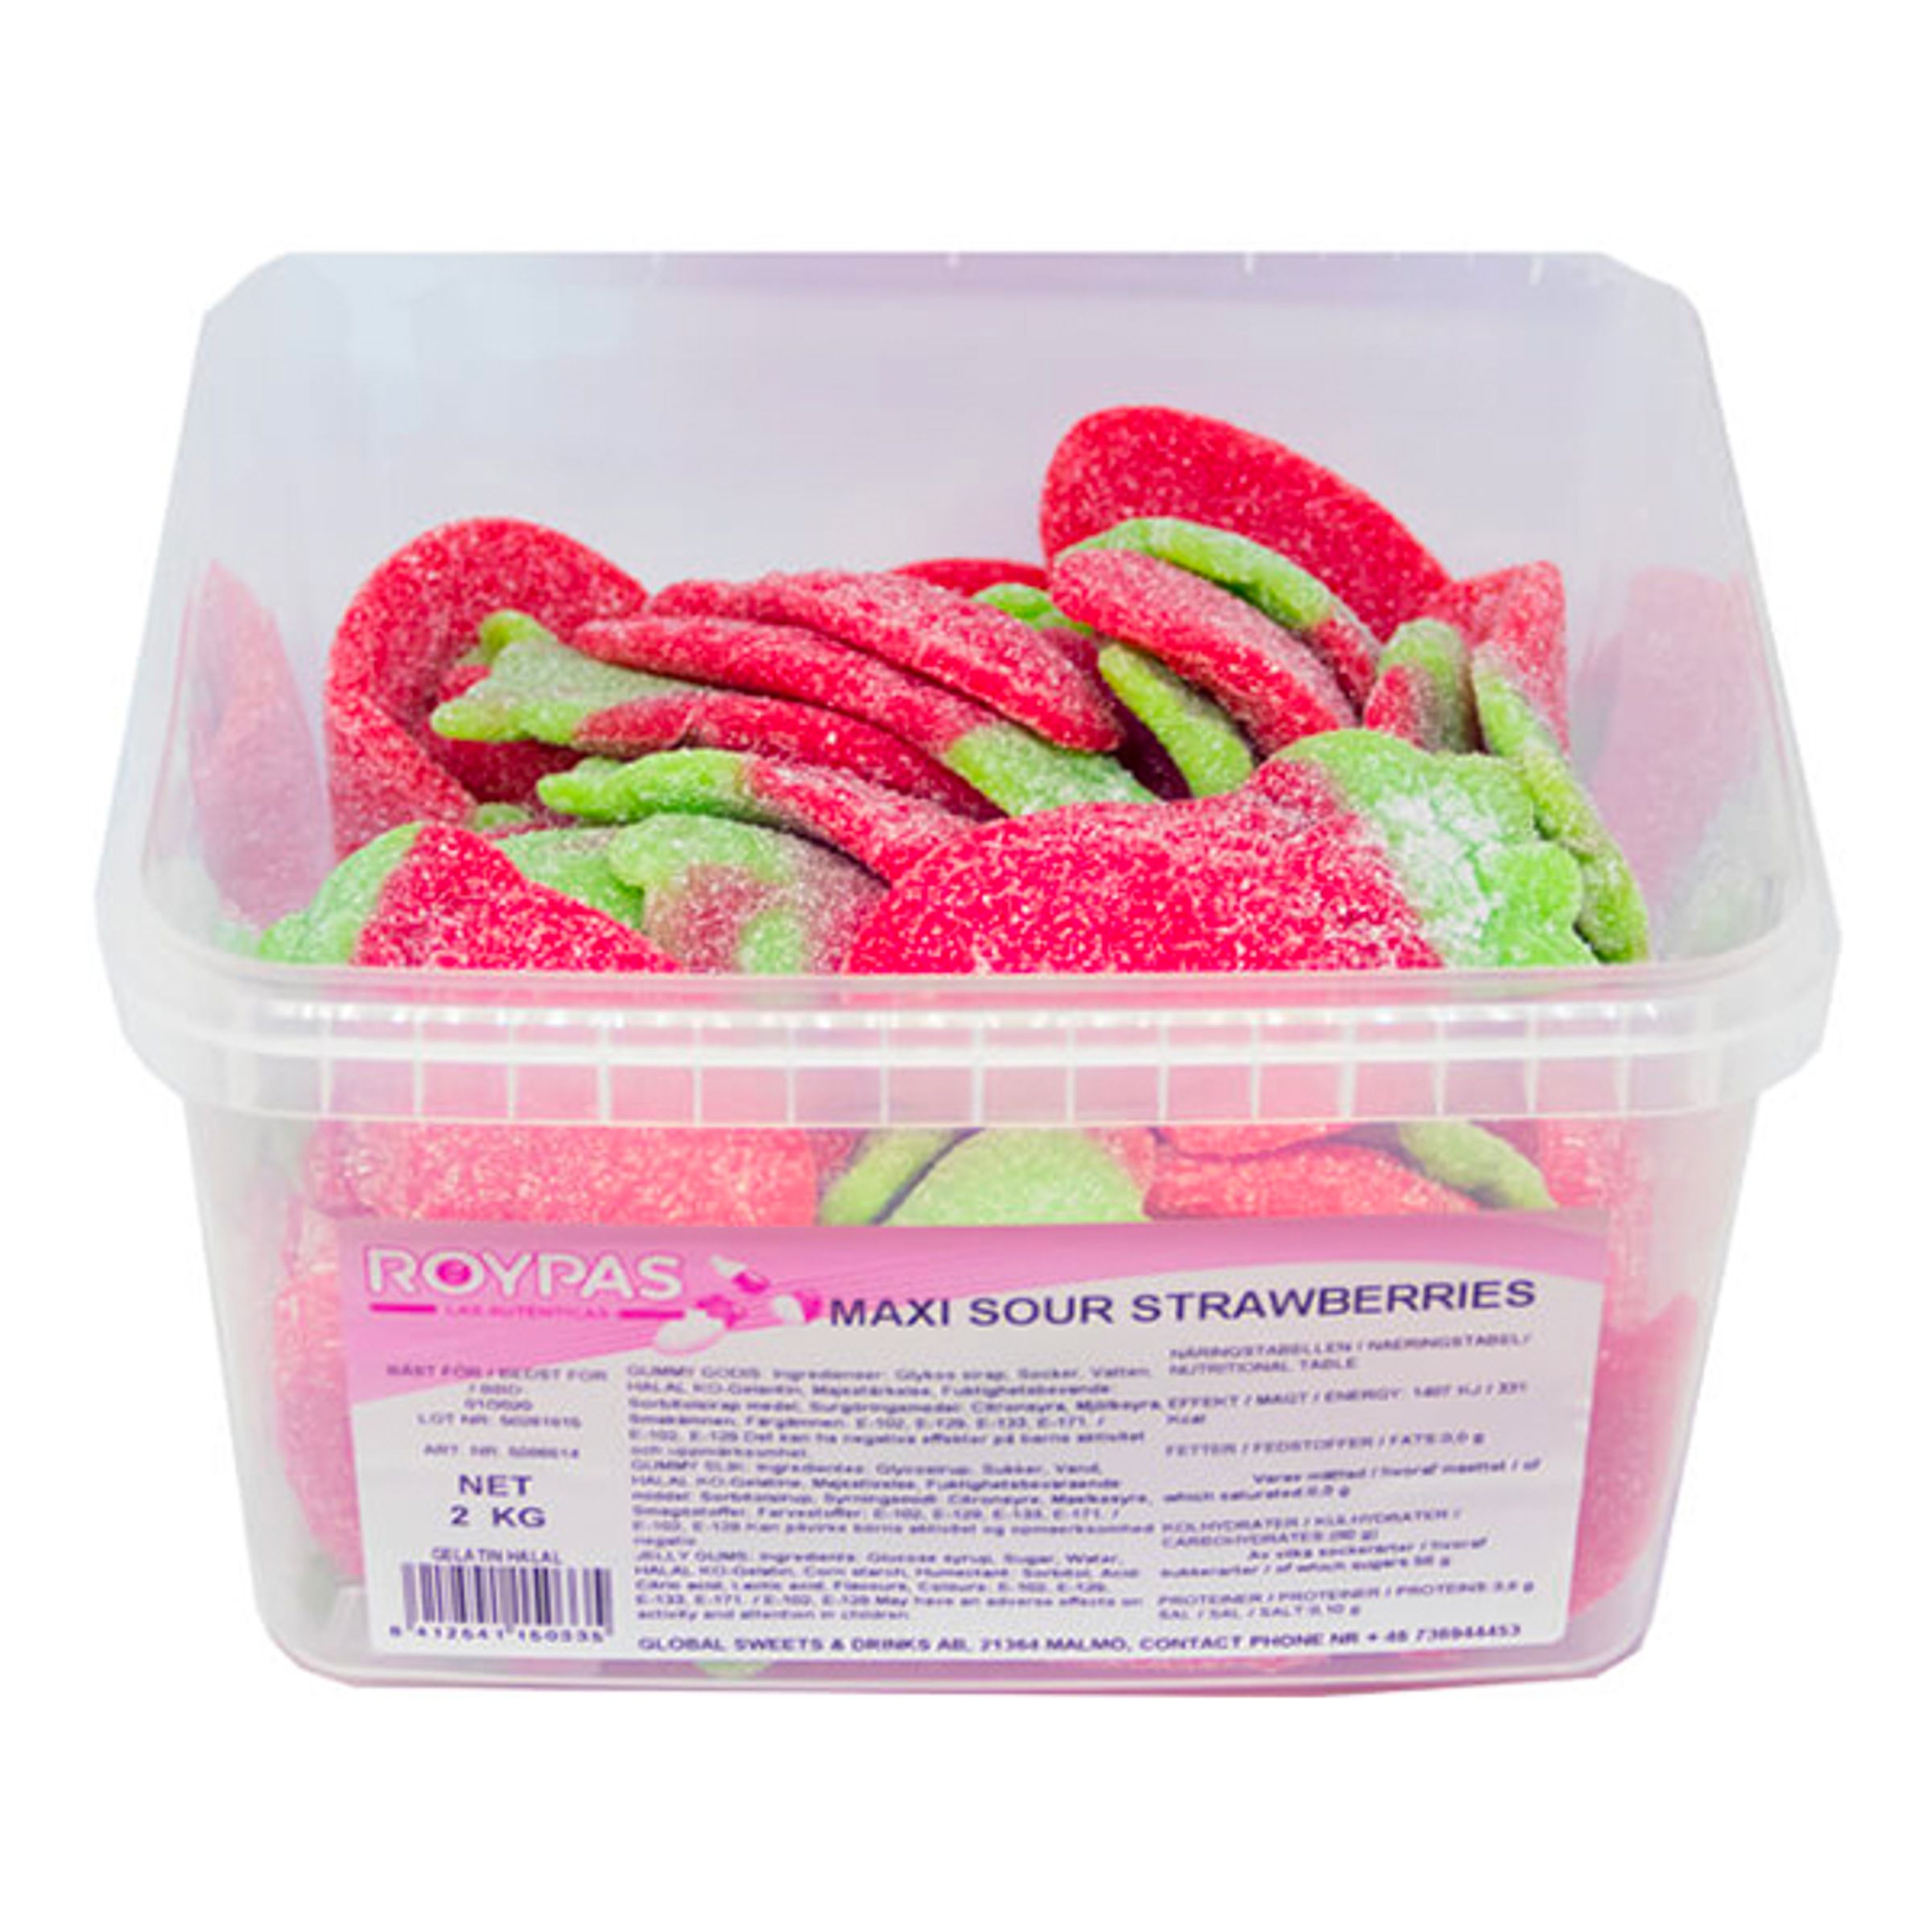 Maxi Sour Strawberries Storpack - 2 kg